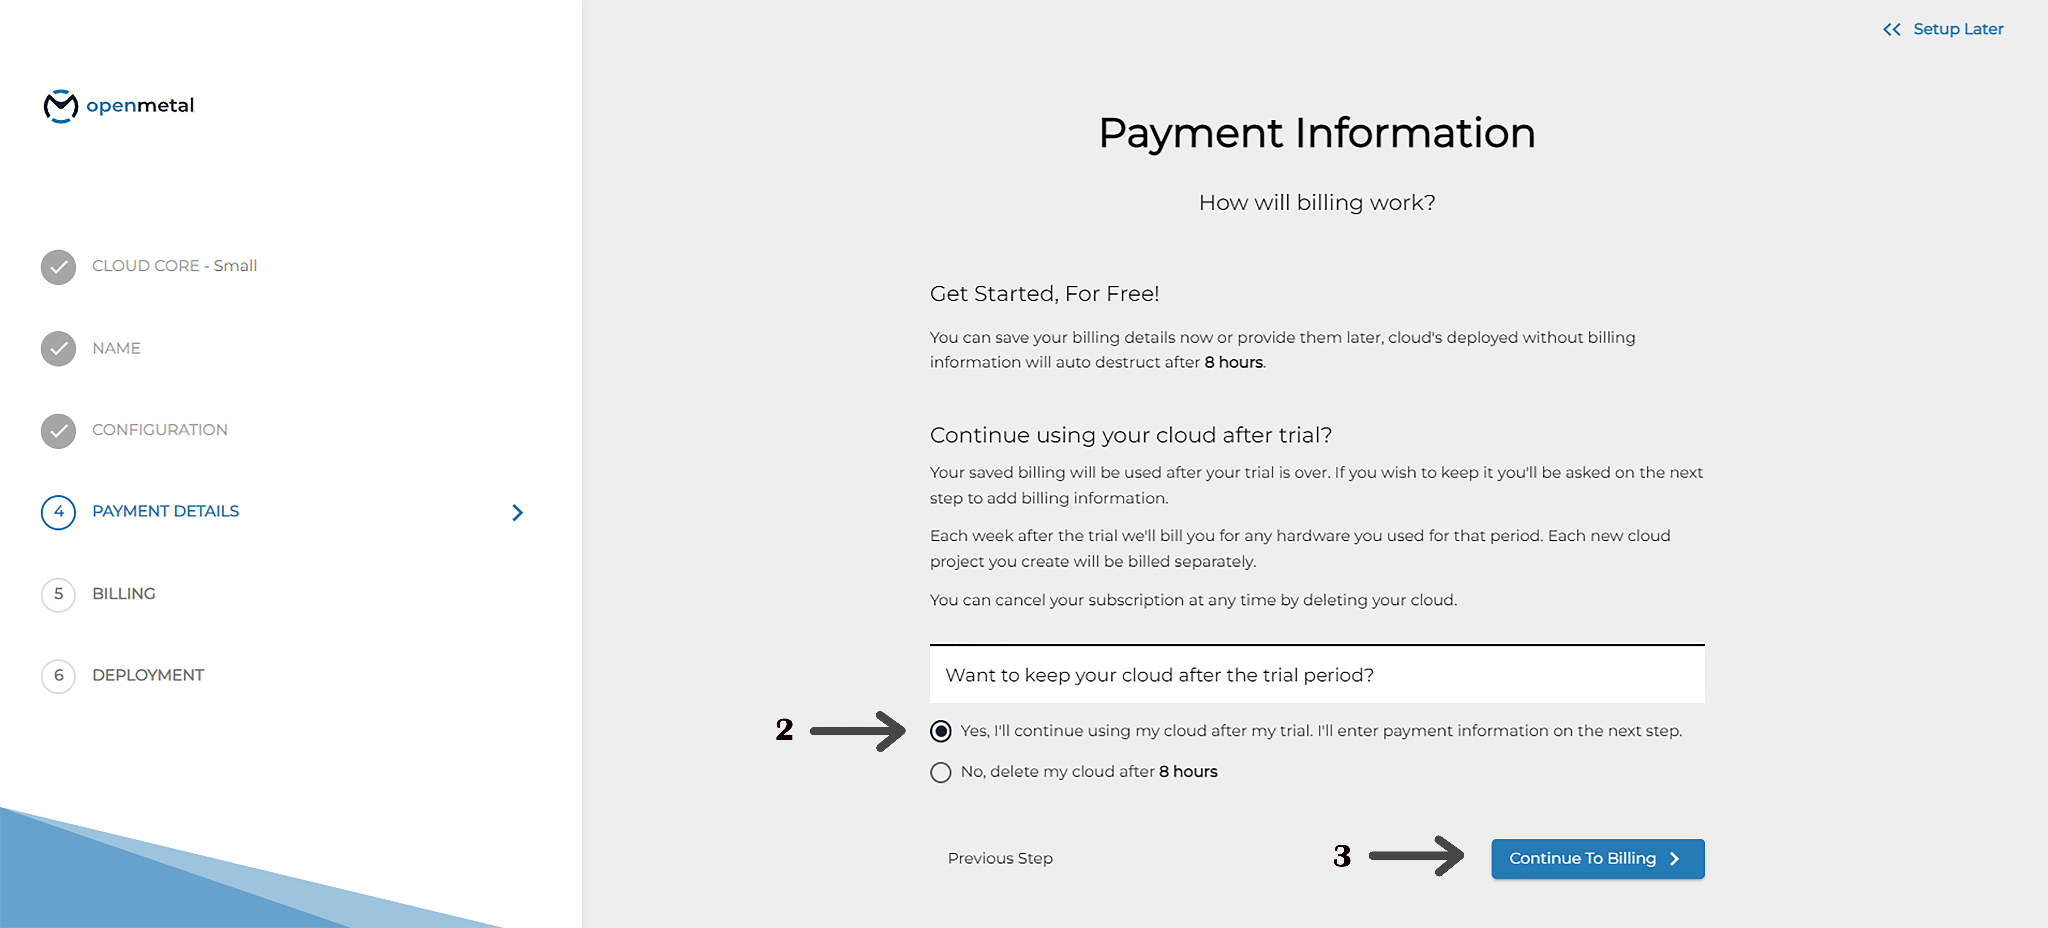 OpenMetal Central Payment Information